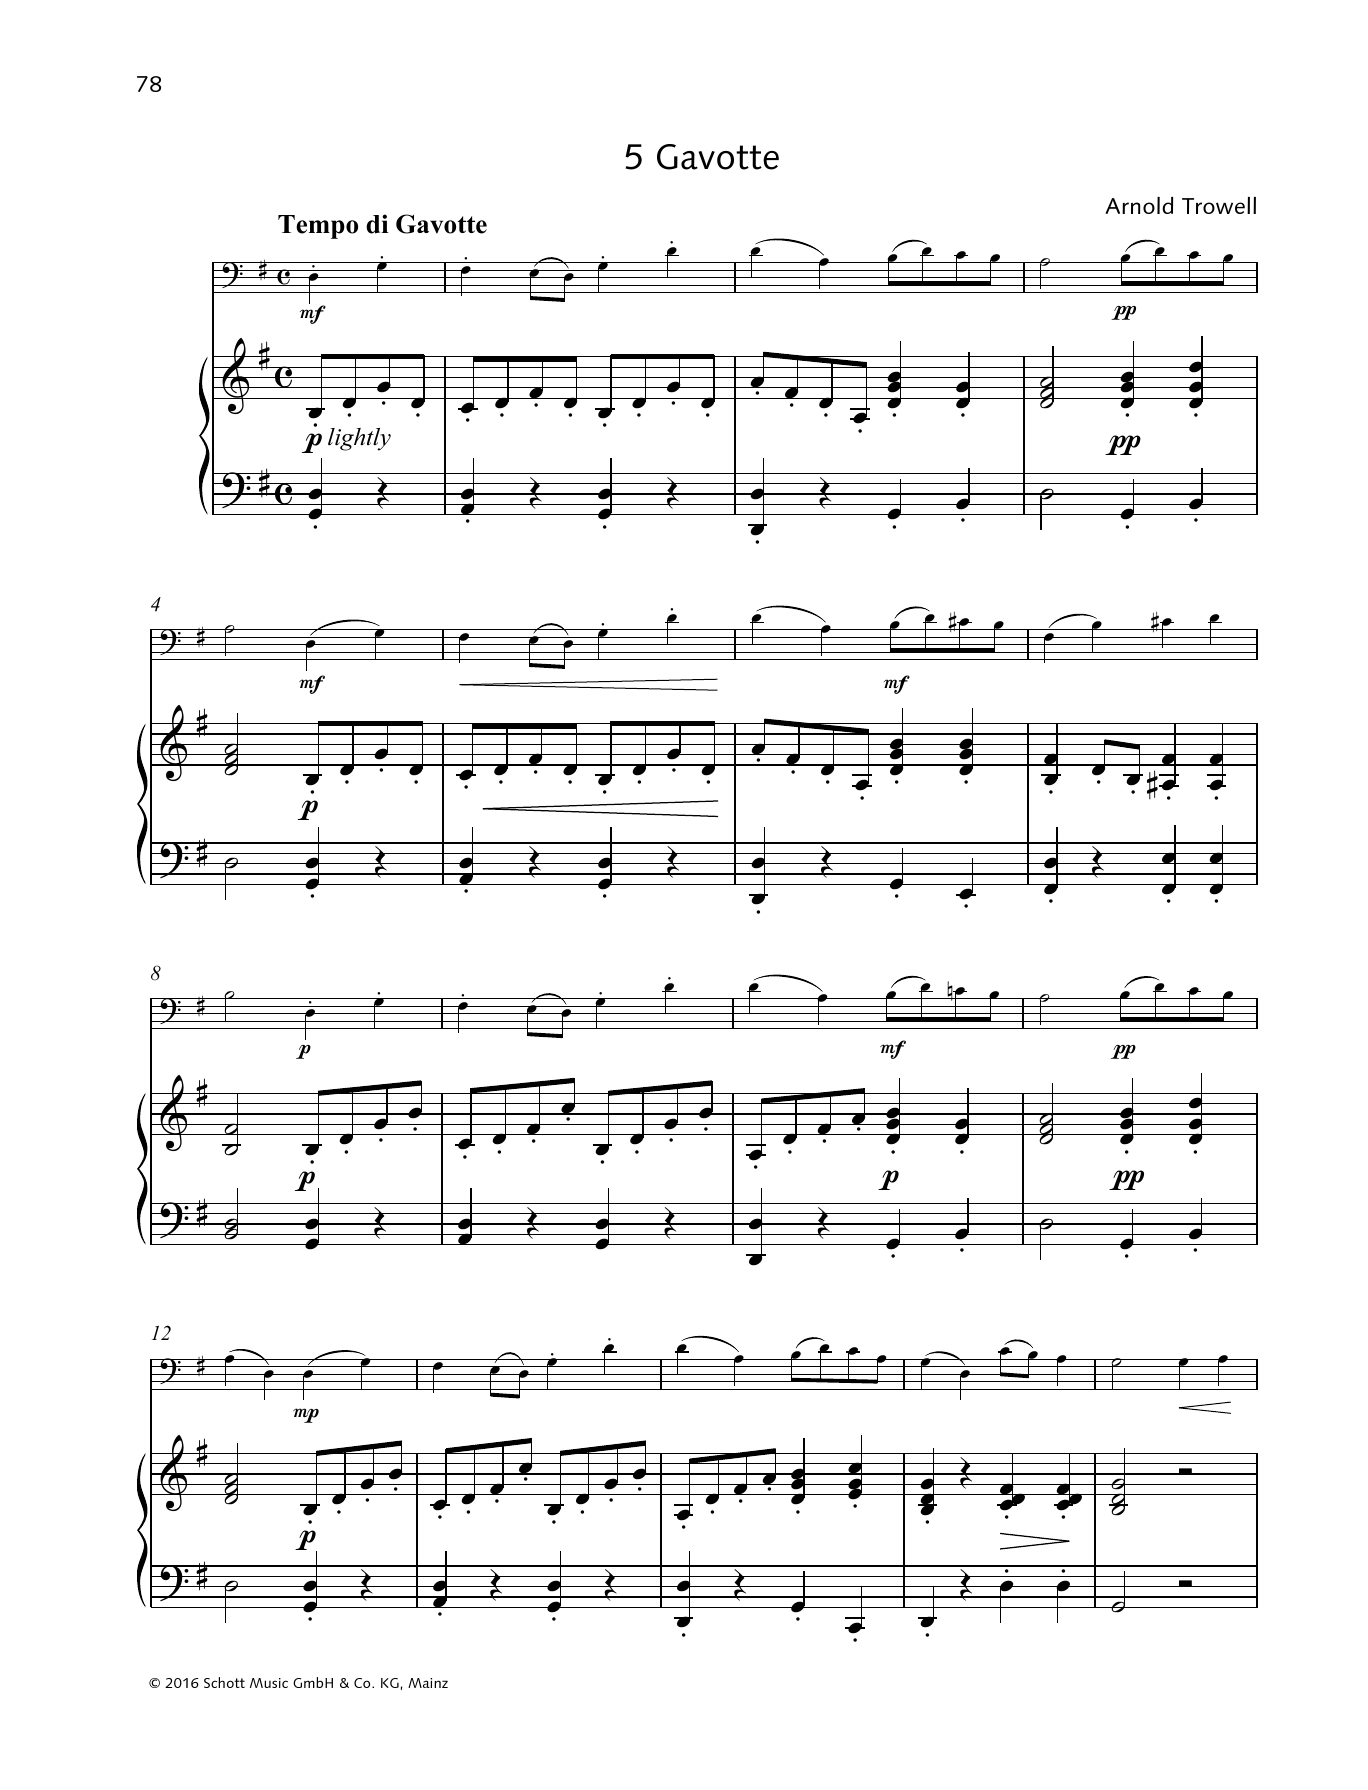 Download Arnold Trowell Gavotte Sheet Music